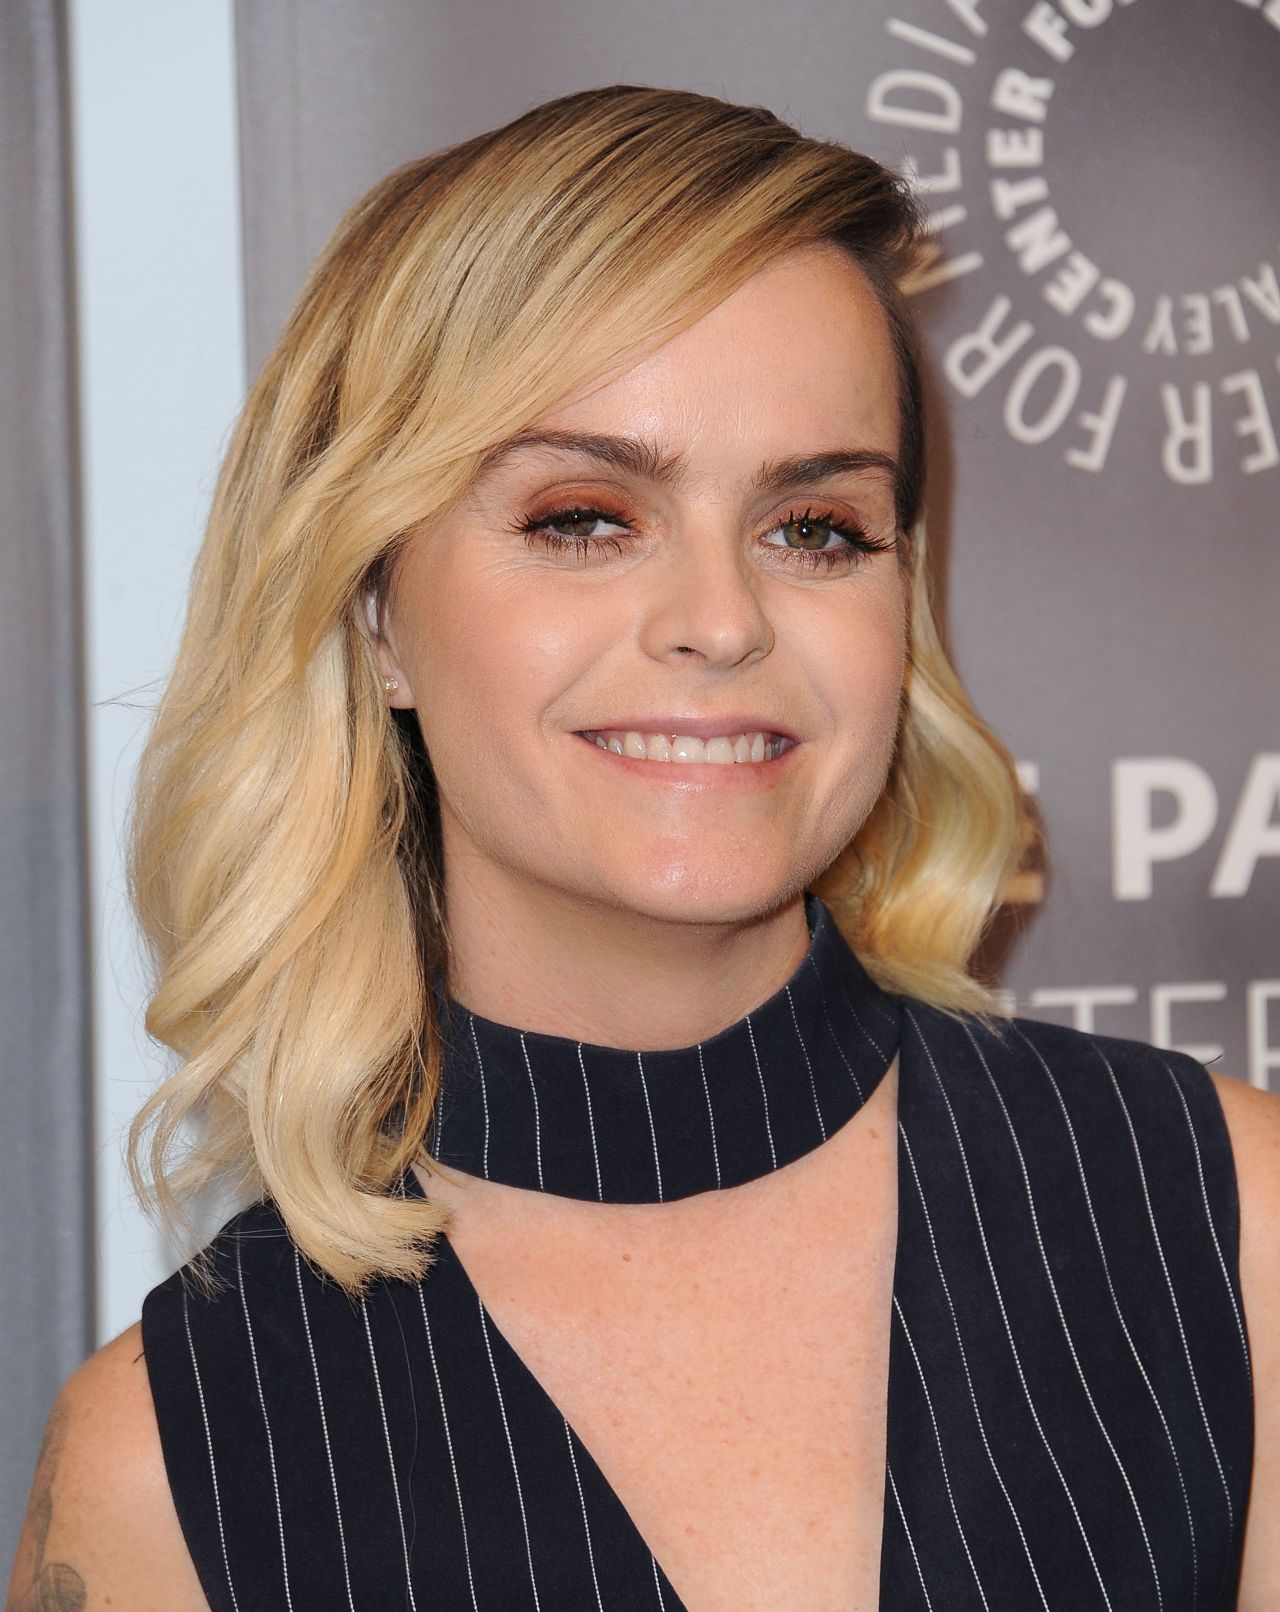 Taryn Manning Orange Is The New Black At Paley Center For Media La In